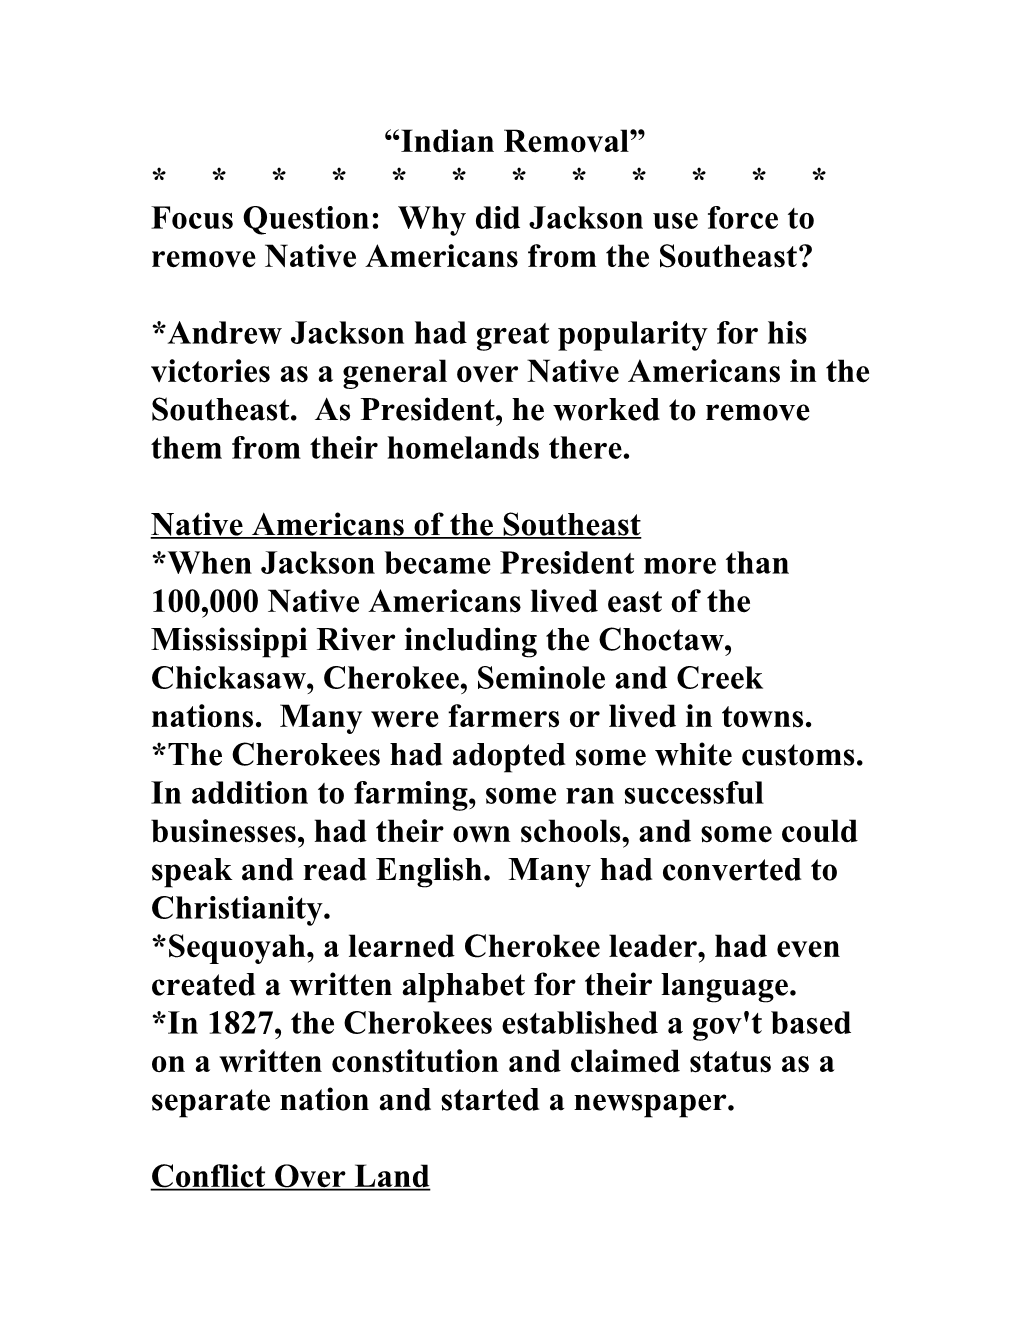 Focus Question: Why Did Jackson Use Force to Remove Native Americans from the Southeast?